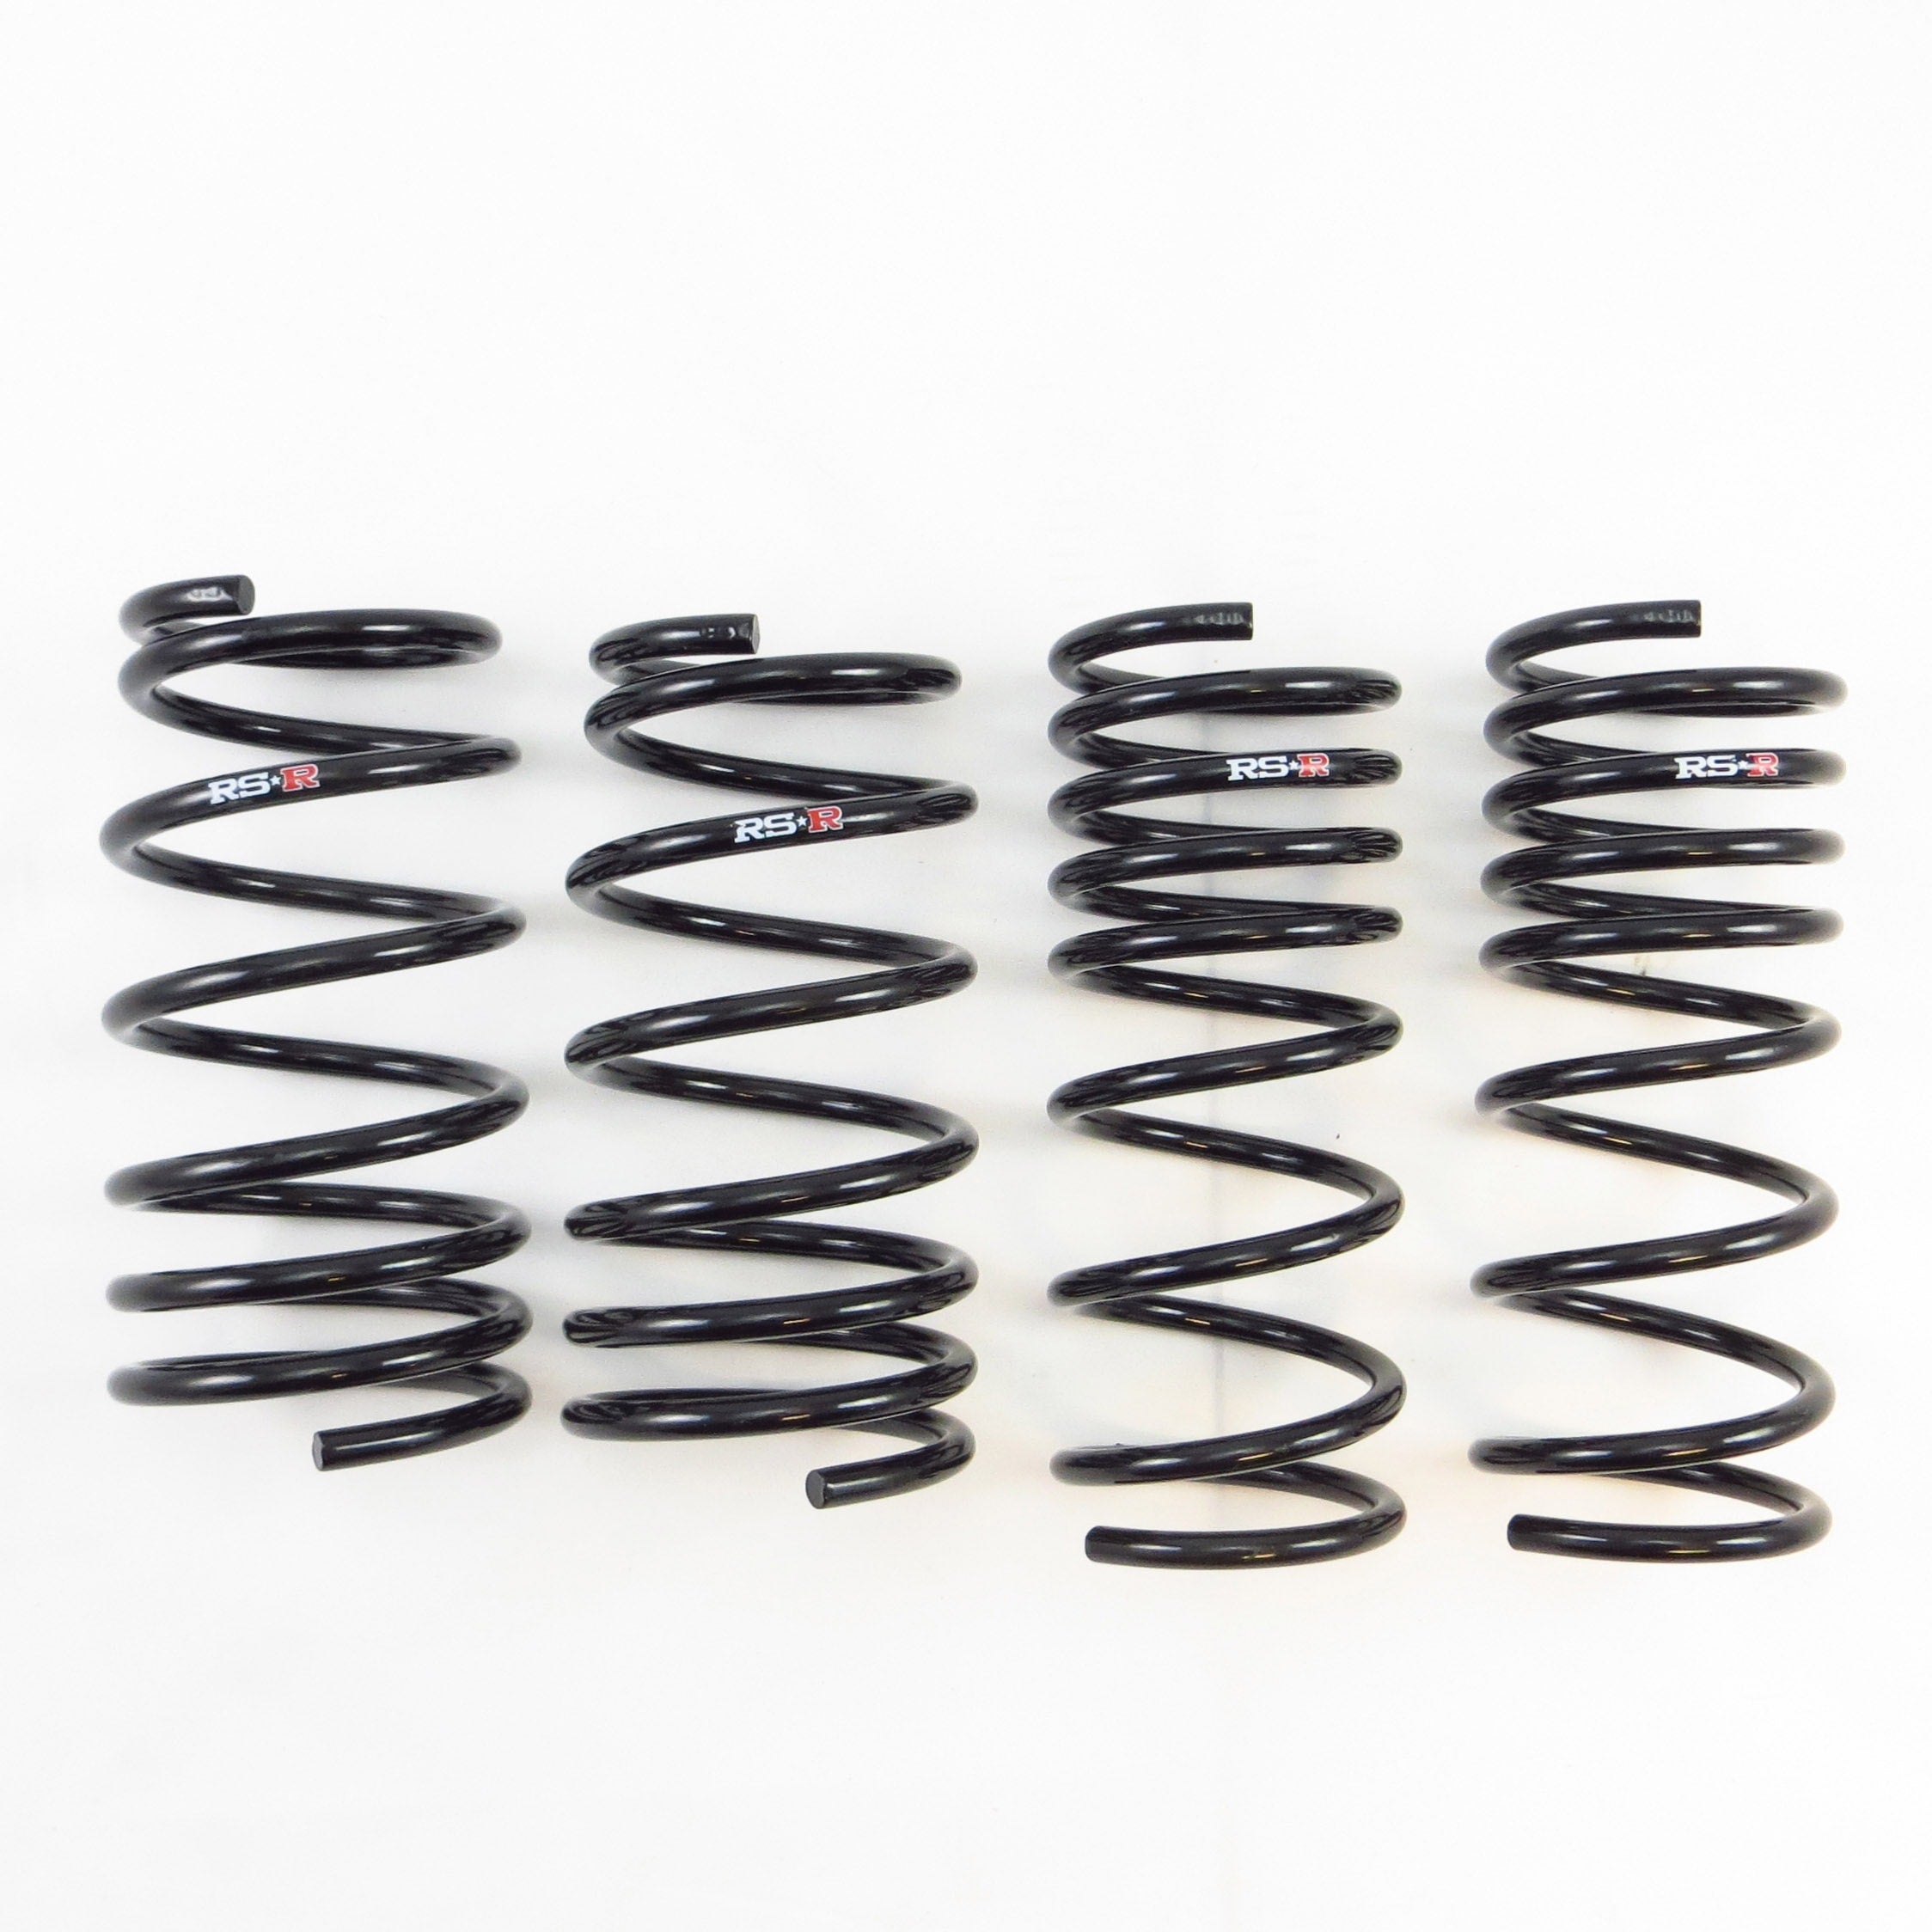 RS-R 13+ Scion FR-S (ZN6) Super Down Springs